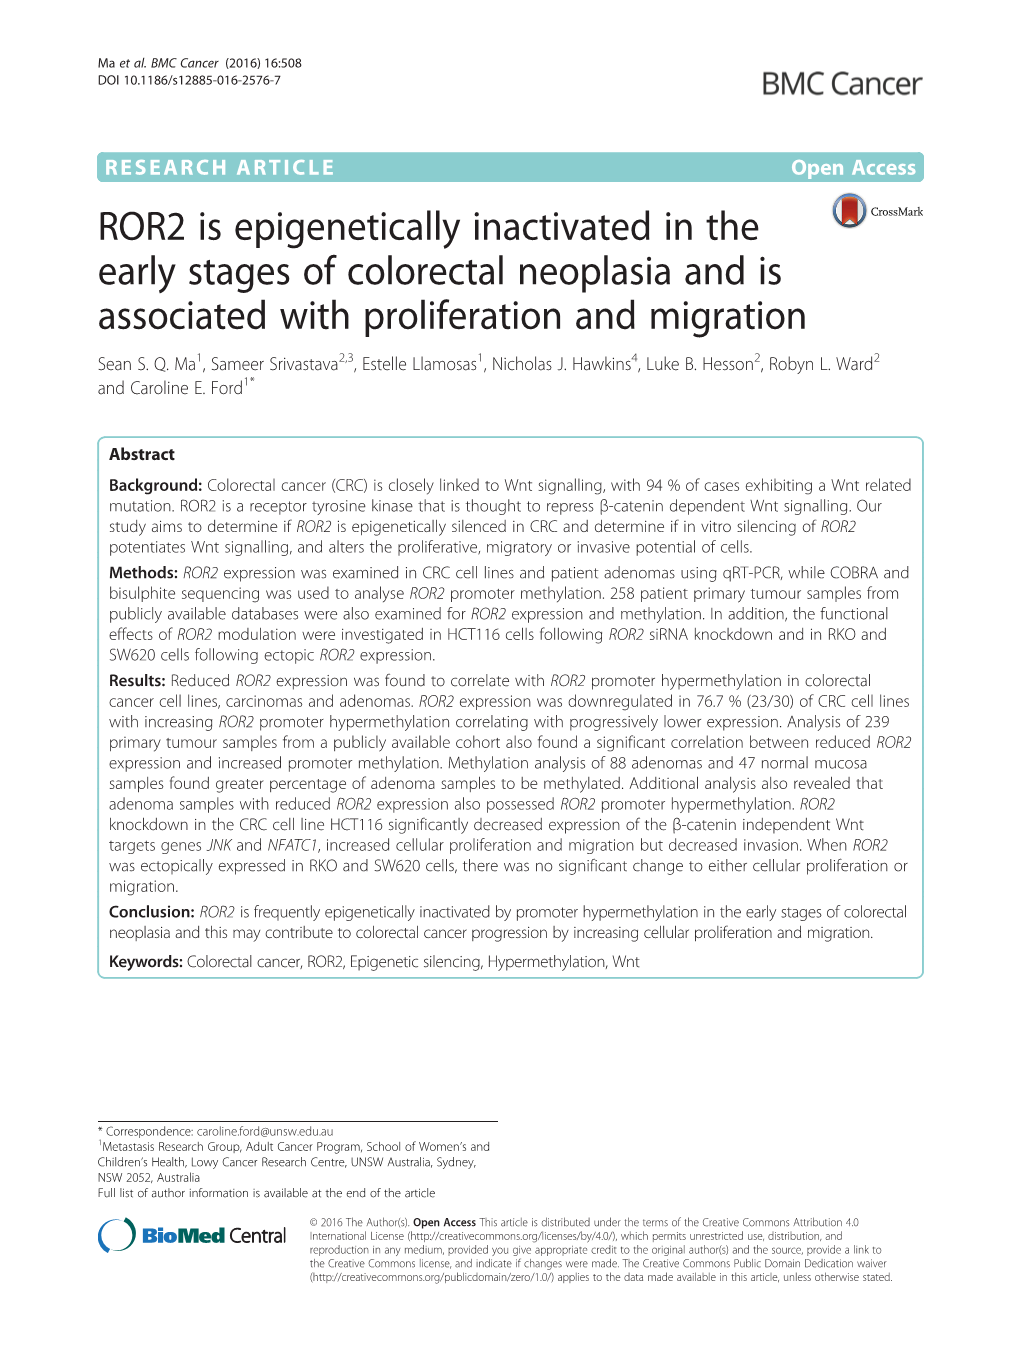 ROR2 Is Epigenetically Inactivated in the Early Stages of Colorectal Neoplasia and Is Associated with Proliferation and Migration Sean S